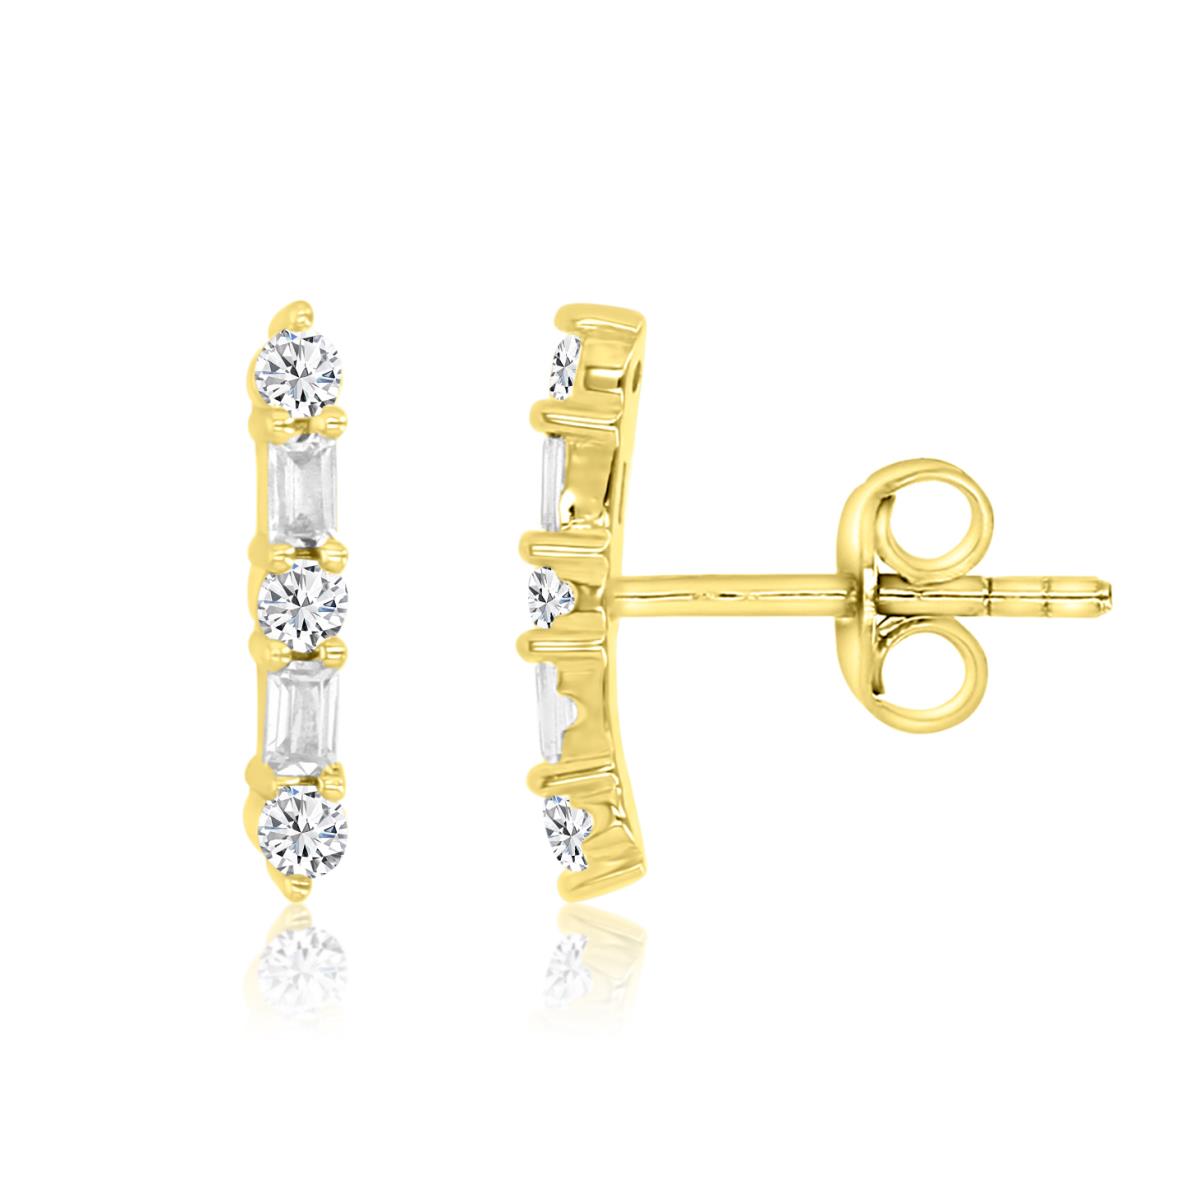 Sterling Silver Yellow 1M 13X2MM Polished White CZ Baguette Stud Earrings